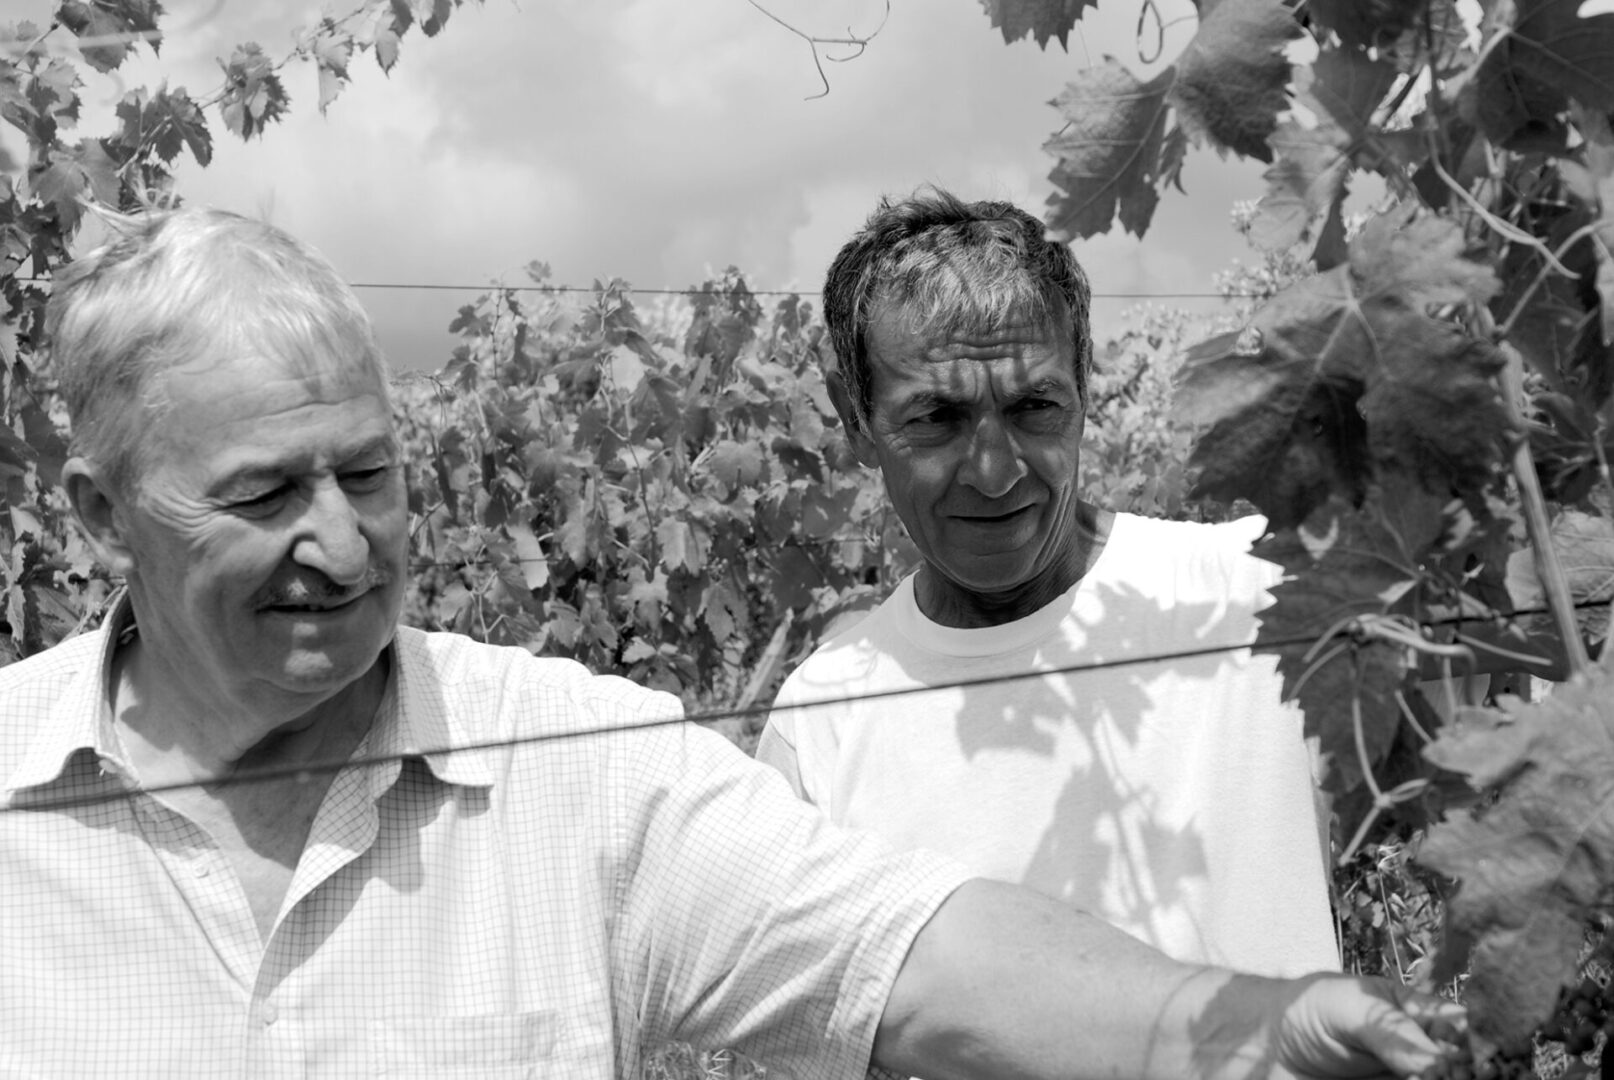 Three men standing in a vineyard with vines behind them.